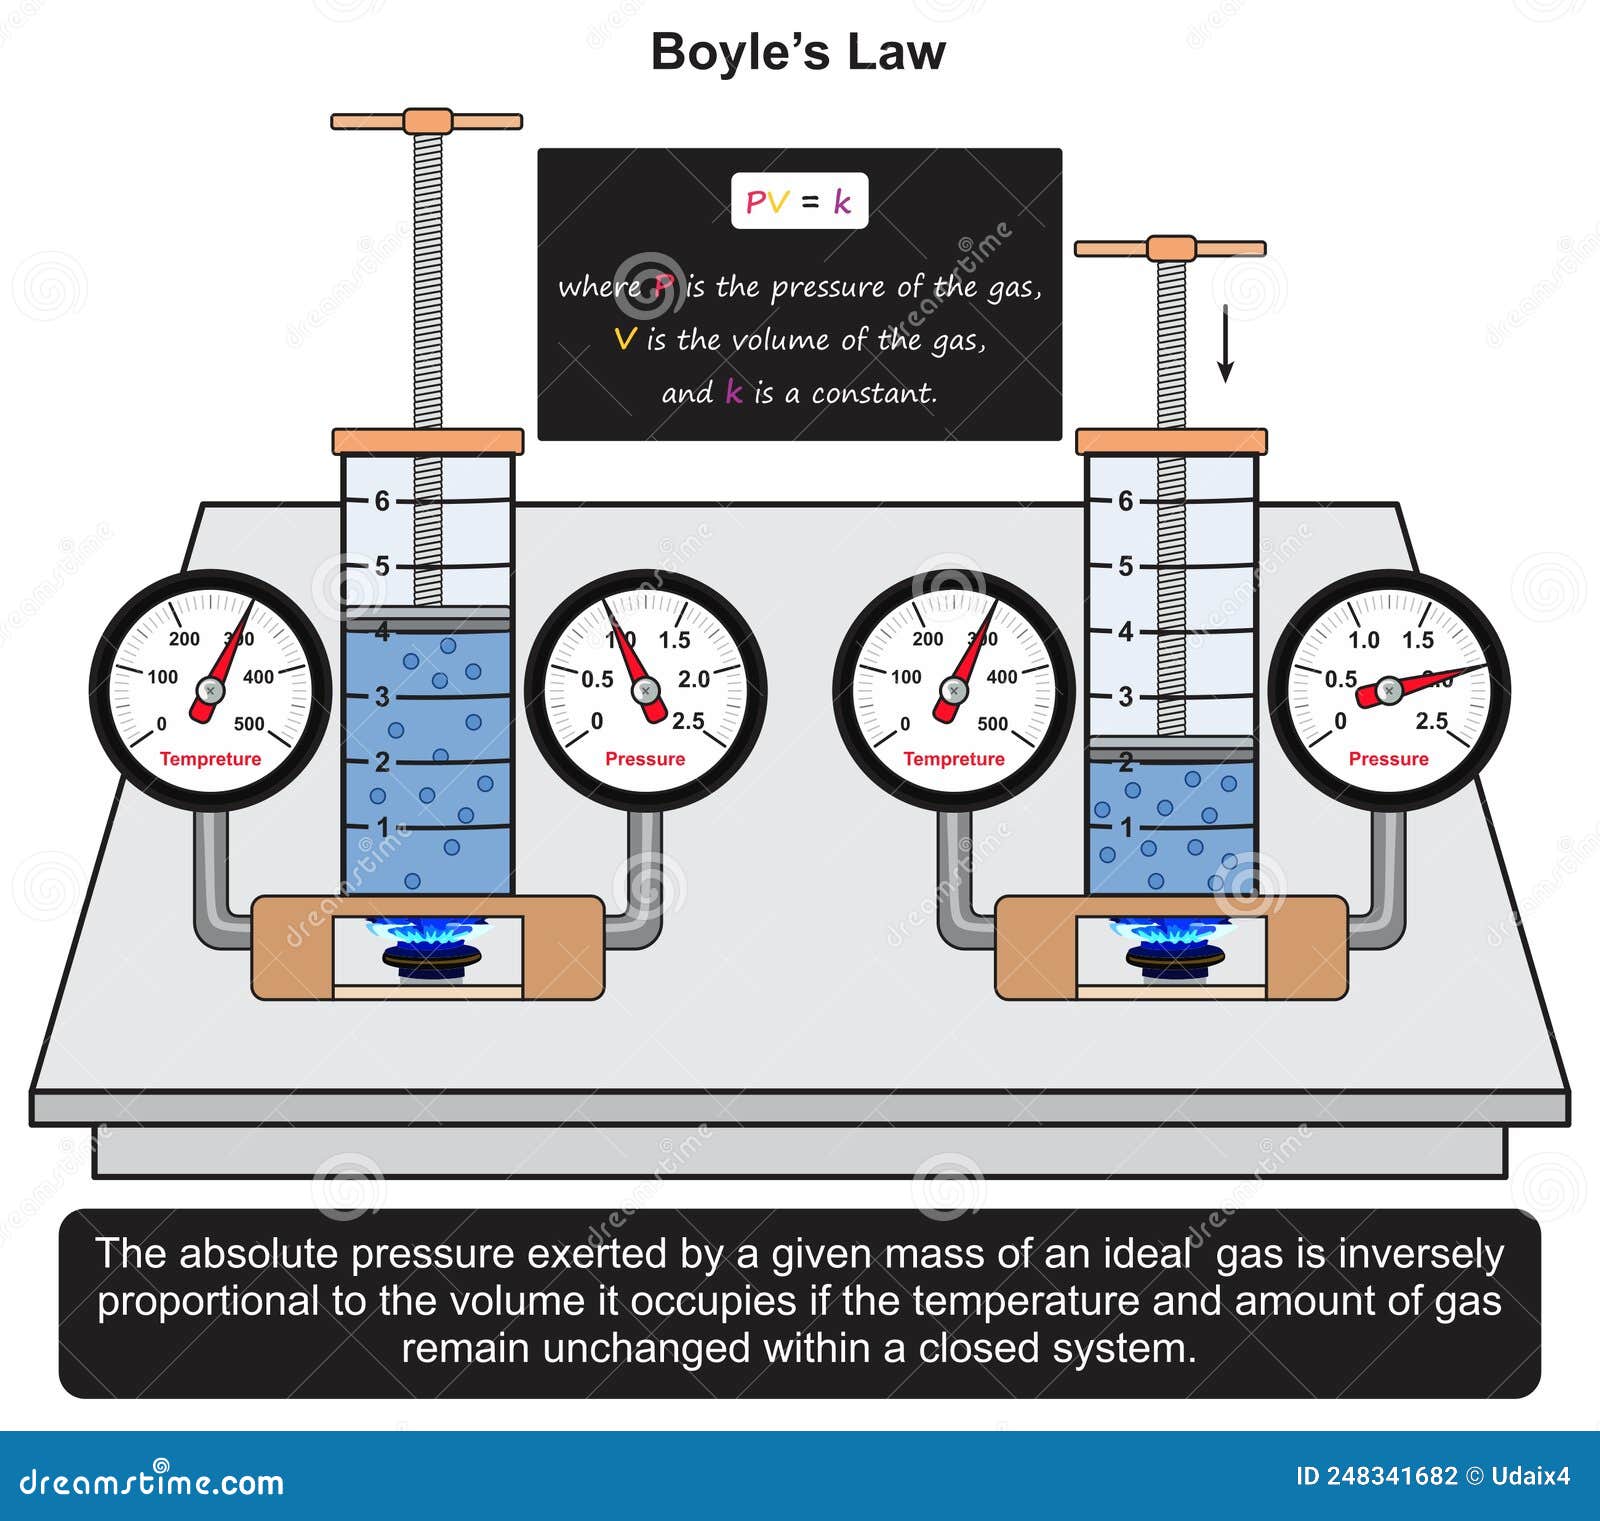 boyle law infographic diagram absolute pressure ideal gas volume amount